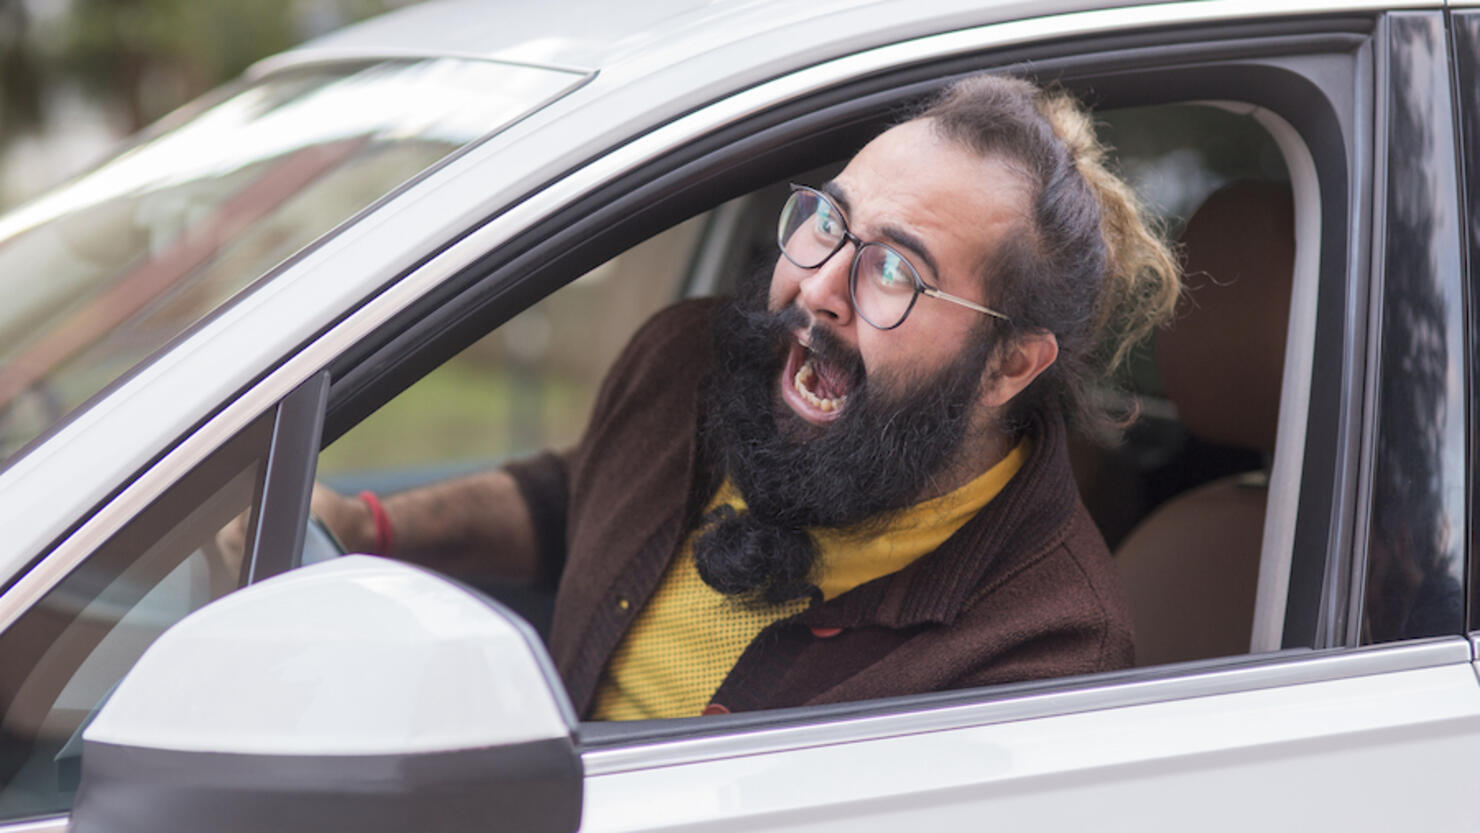 Angry man behind the wheel demonstrating road rage